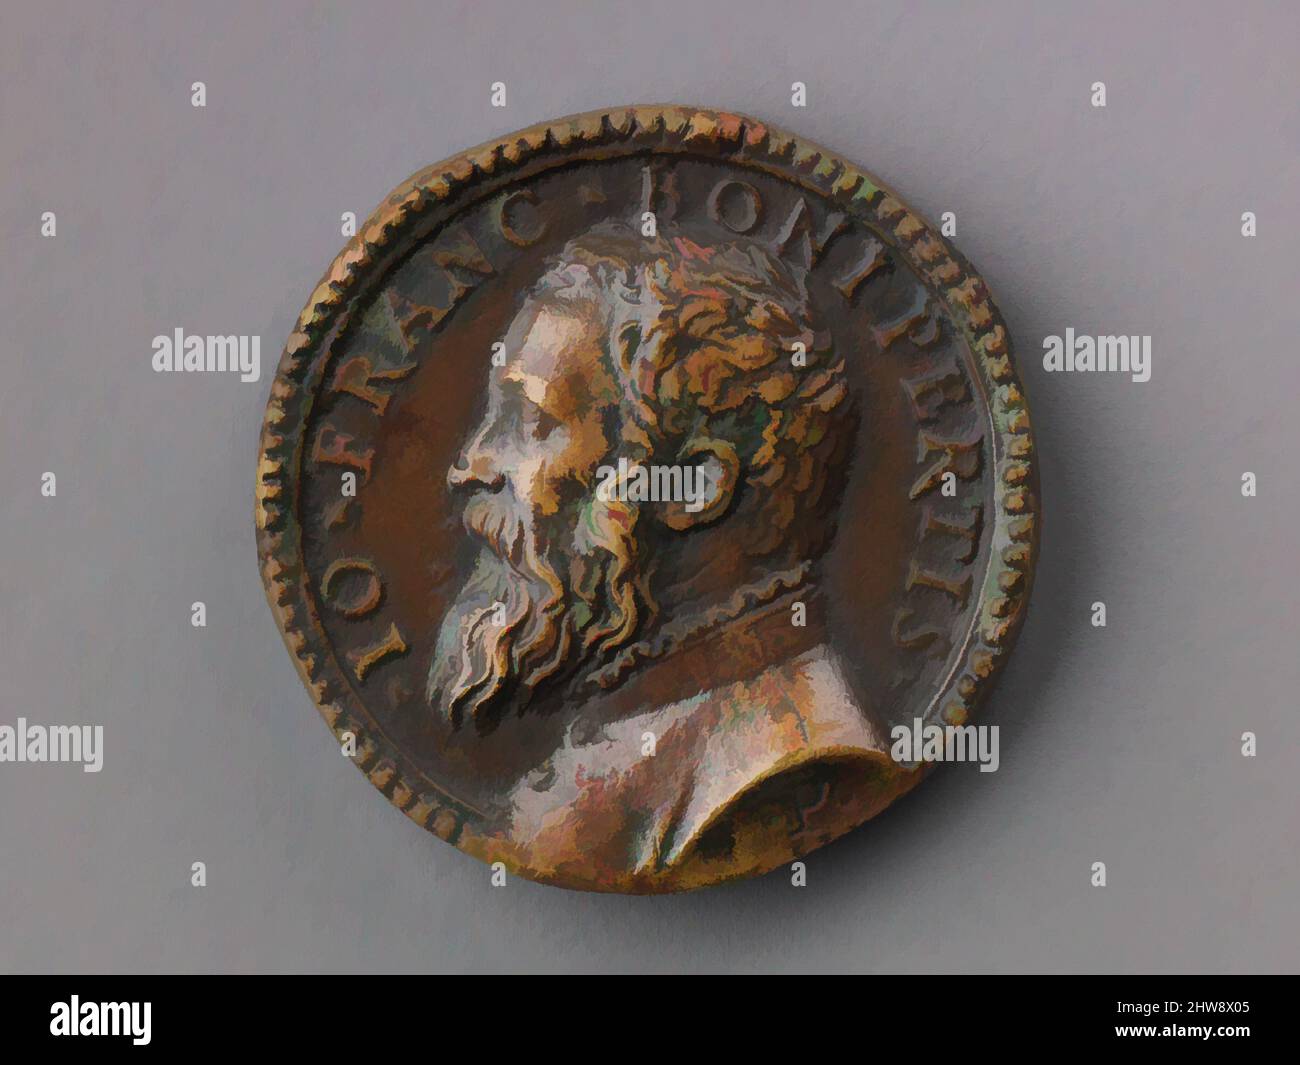 Art inspired by Medal: Bust of Gianfrancesco Boniperti, model ca. 1550 (contemporary cast), Bronze (Copper alloy with reddish brown, Diam. 3.9 cm, wt. 26.02 g., Medals, Pastorino de Pastorini (Italian, Castelnuovo della Berardenga 1508–1592 Florence), Pastorino de Pastorini was an, Classic works modernized by Artotop with a splash of modernity. Shapes, color and value, eye-catching visual impact on art. Emotions through freedom of artworks in a contemporary way. A timeless message pursuing a wildly creative new direction. Artists turning to the digital medium and creating the Artotop NFT Stock Photo